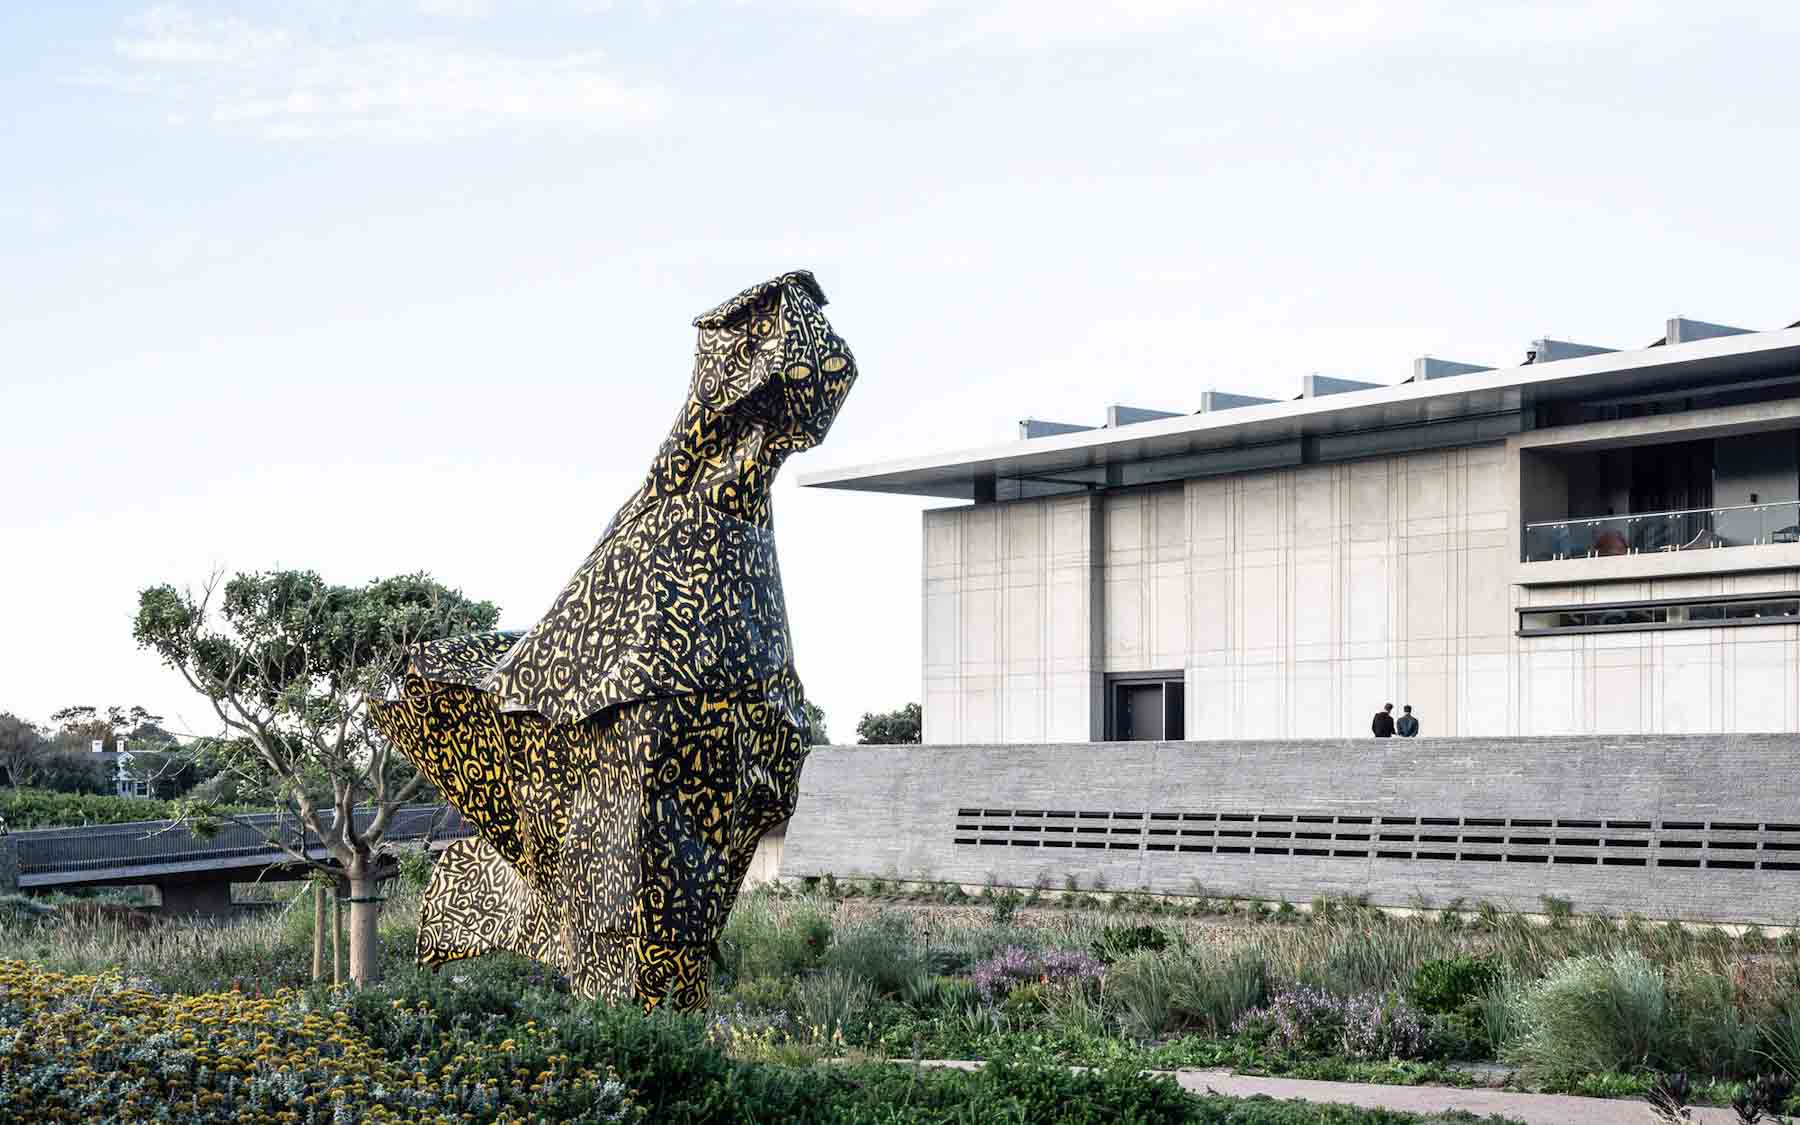 A sculpture in the Norval Foundation Sculpture Garden – one of the top art galleries in Cape Town.